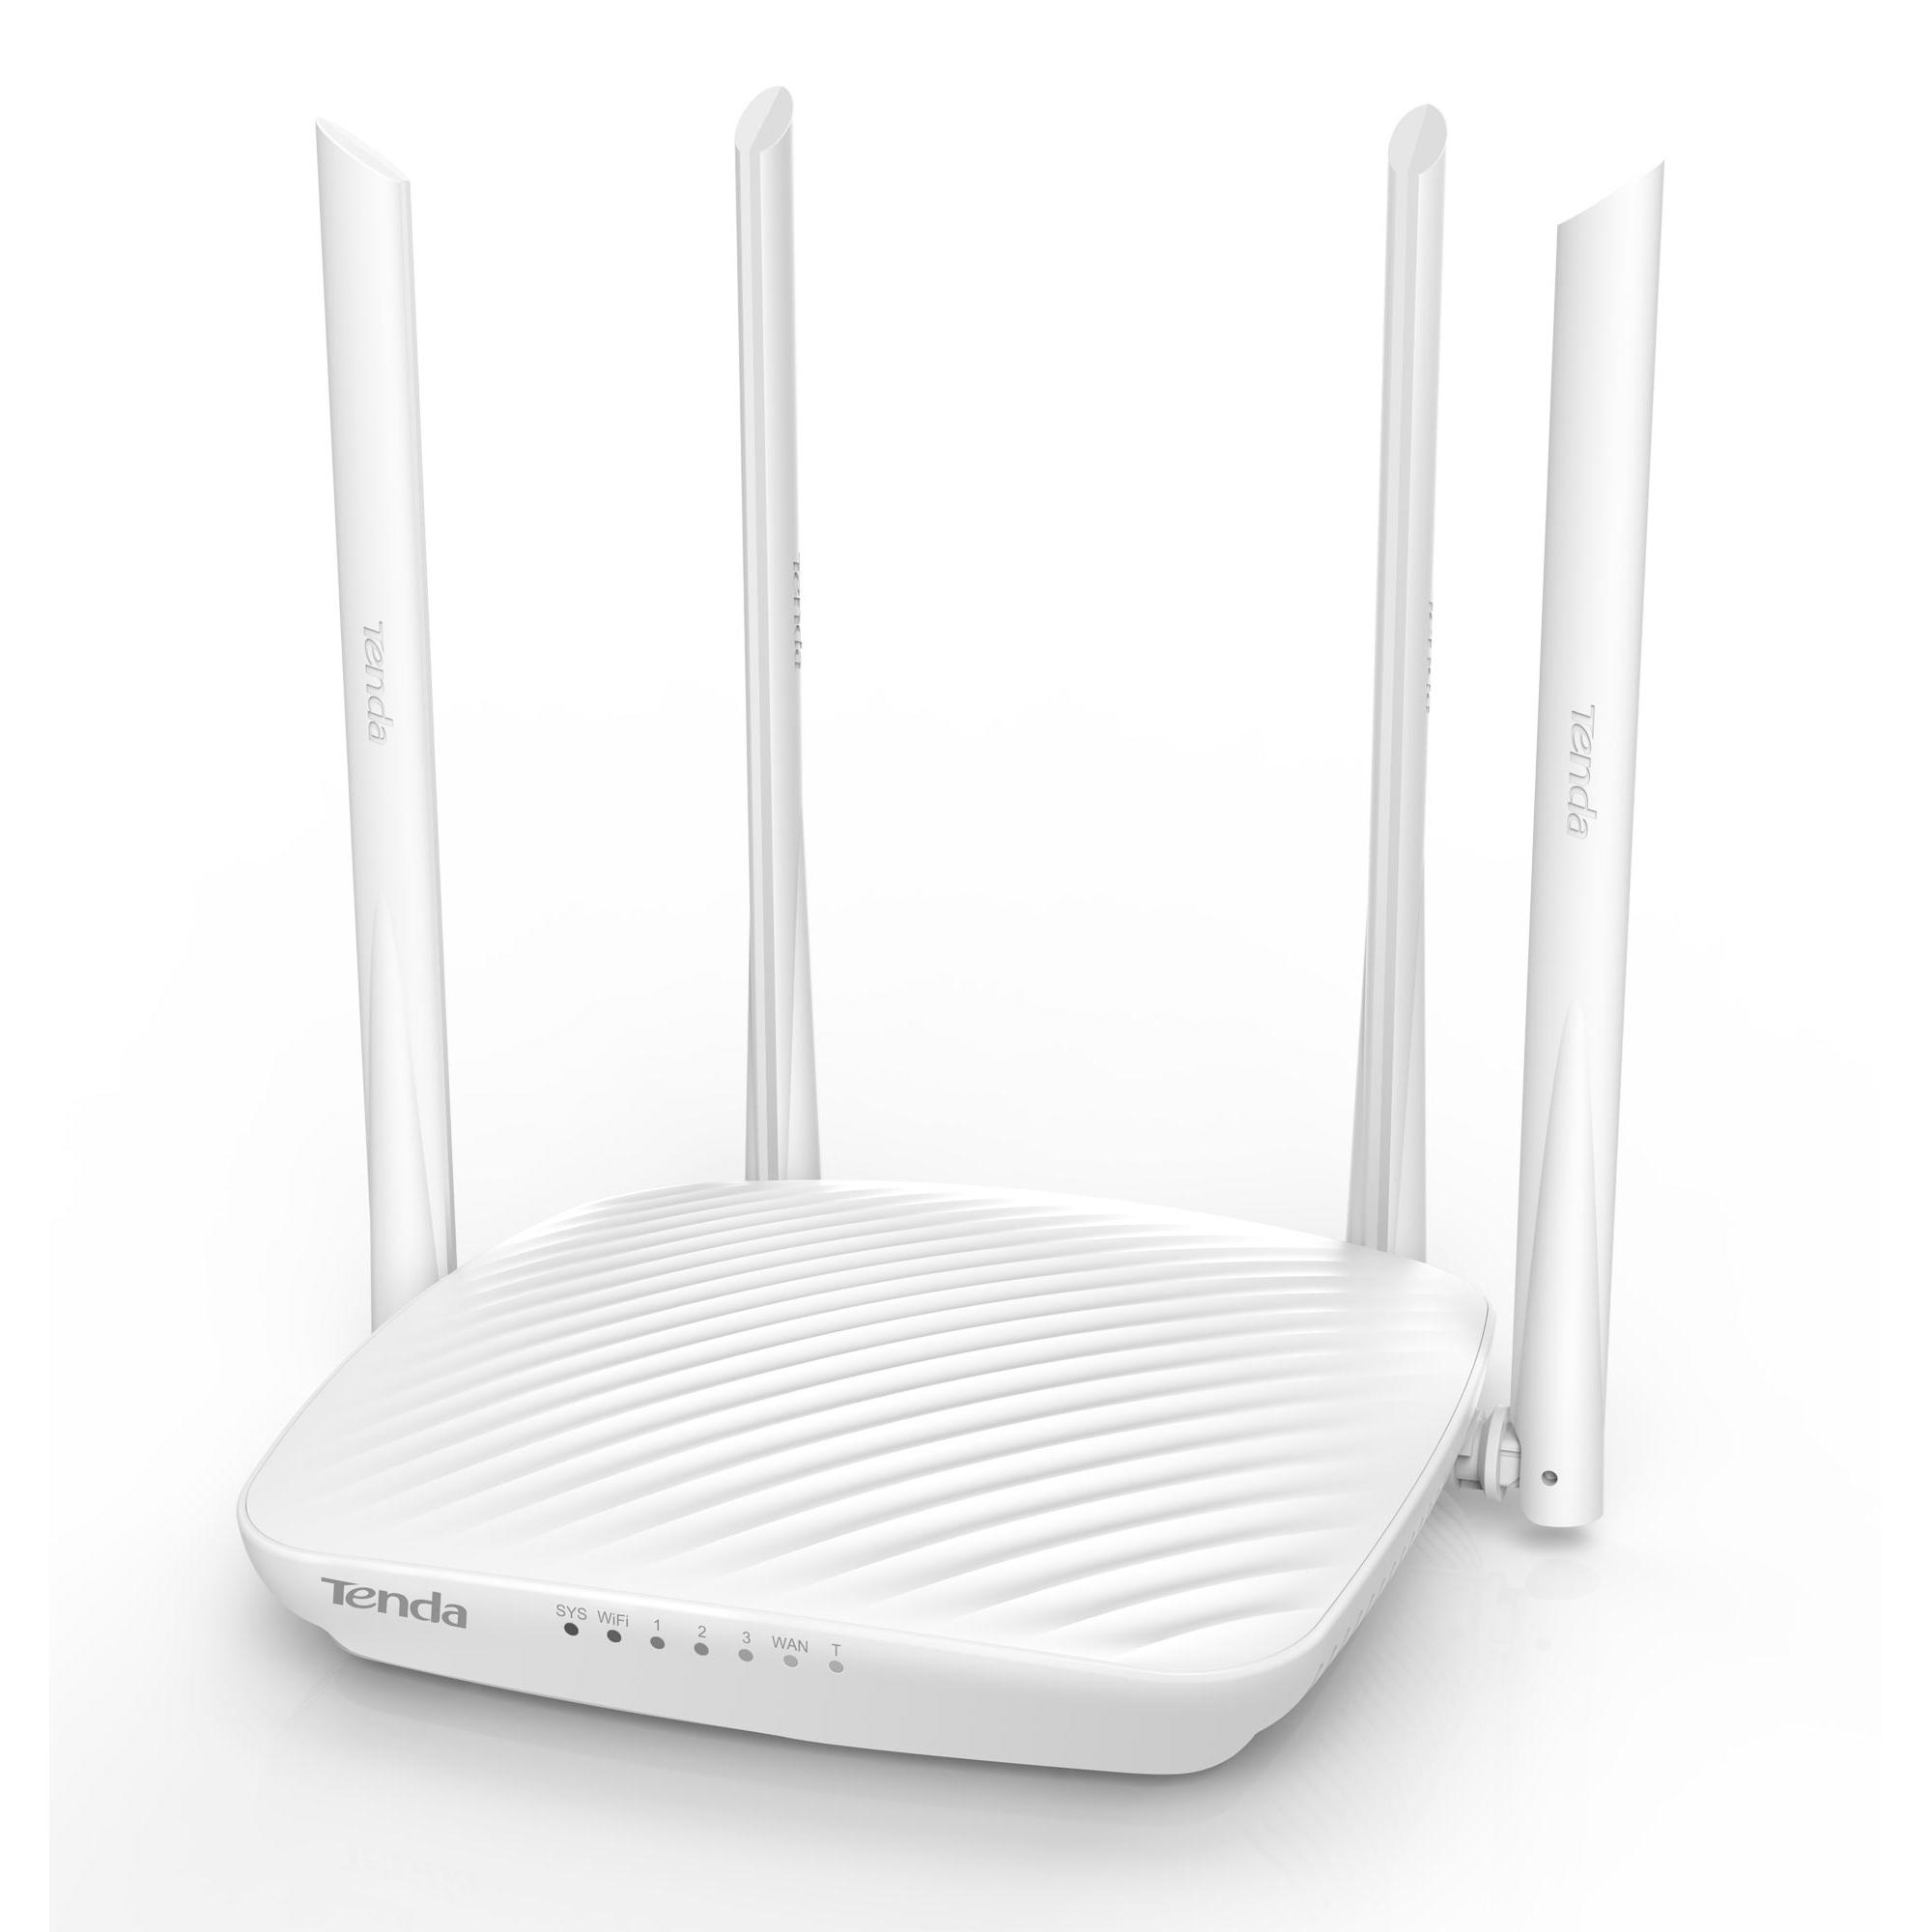 Router Wireless 600M F9